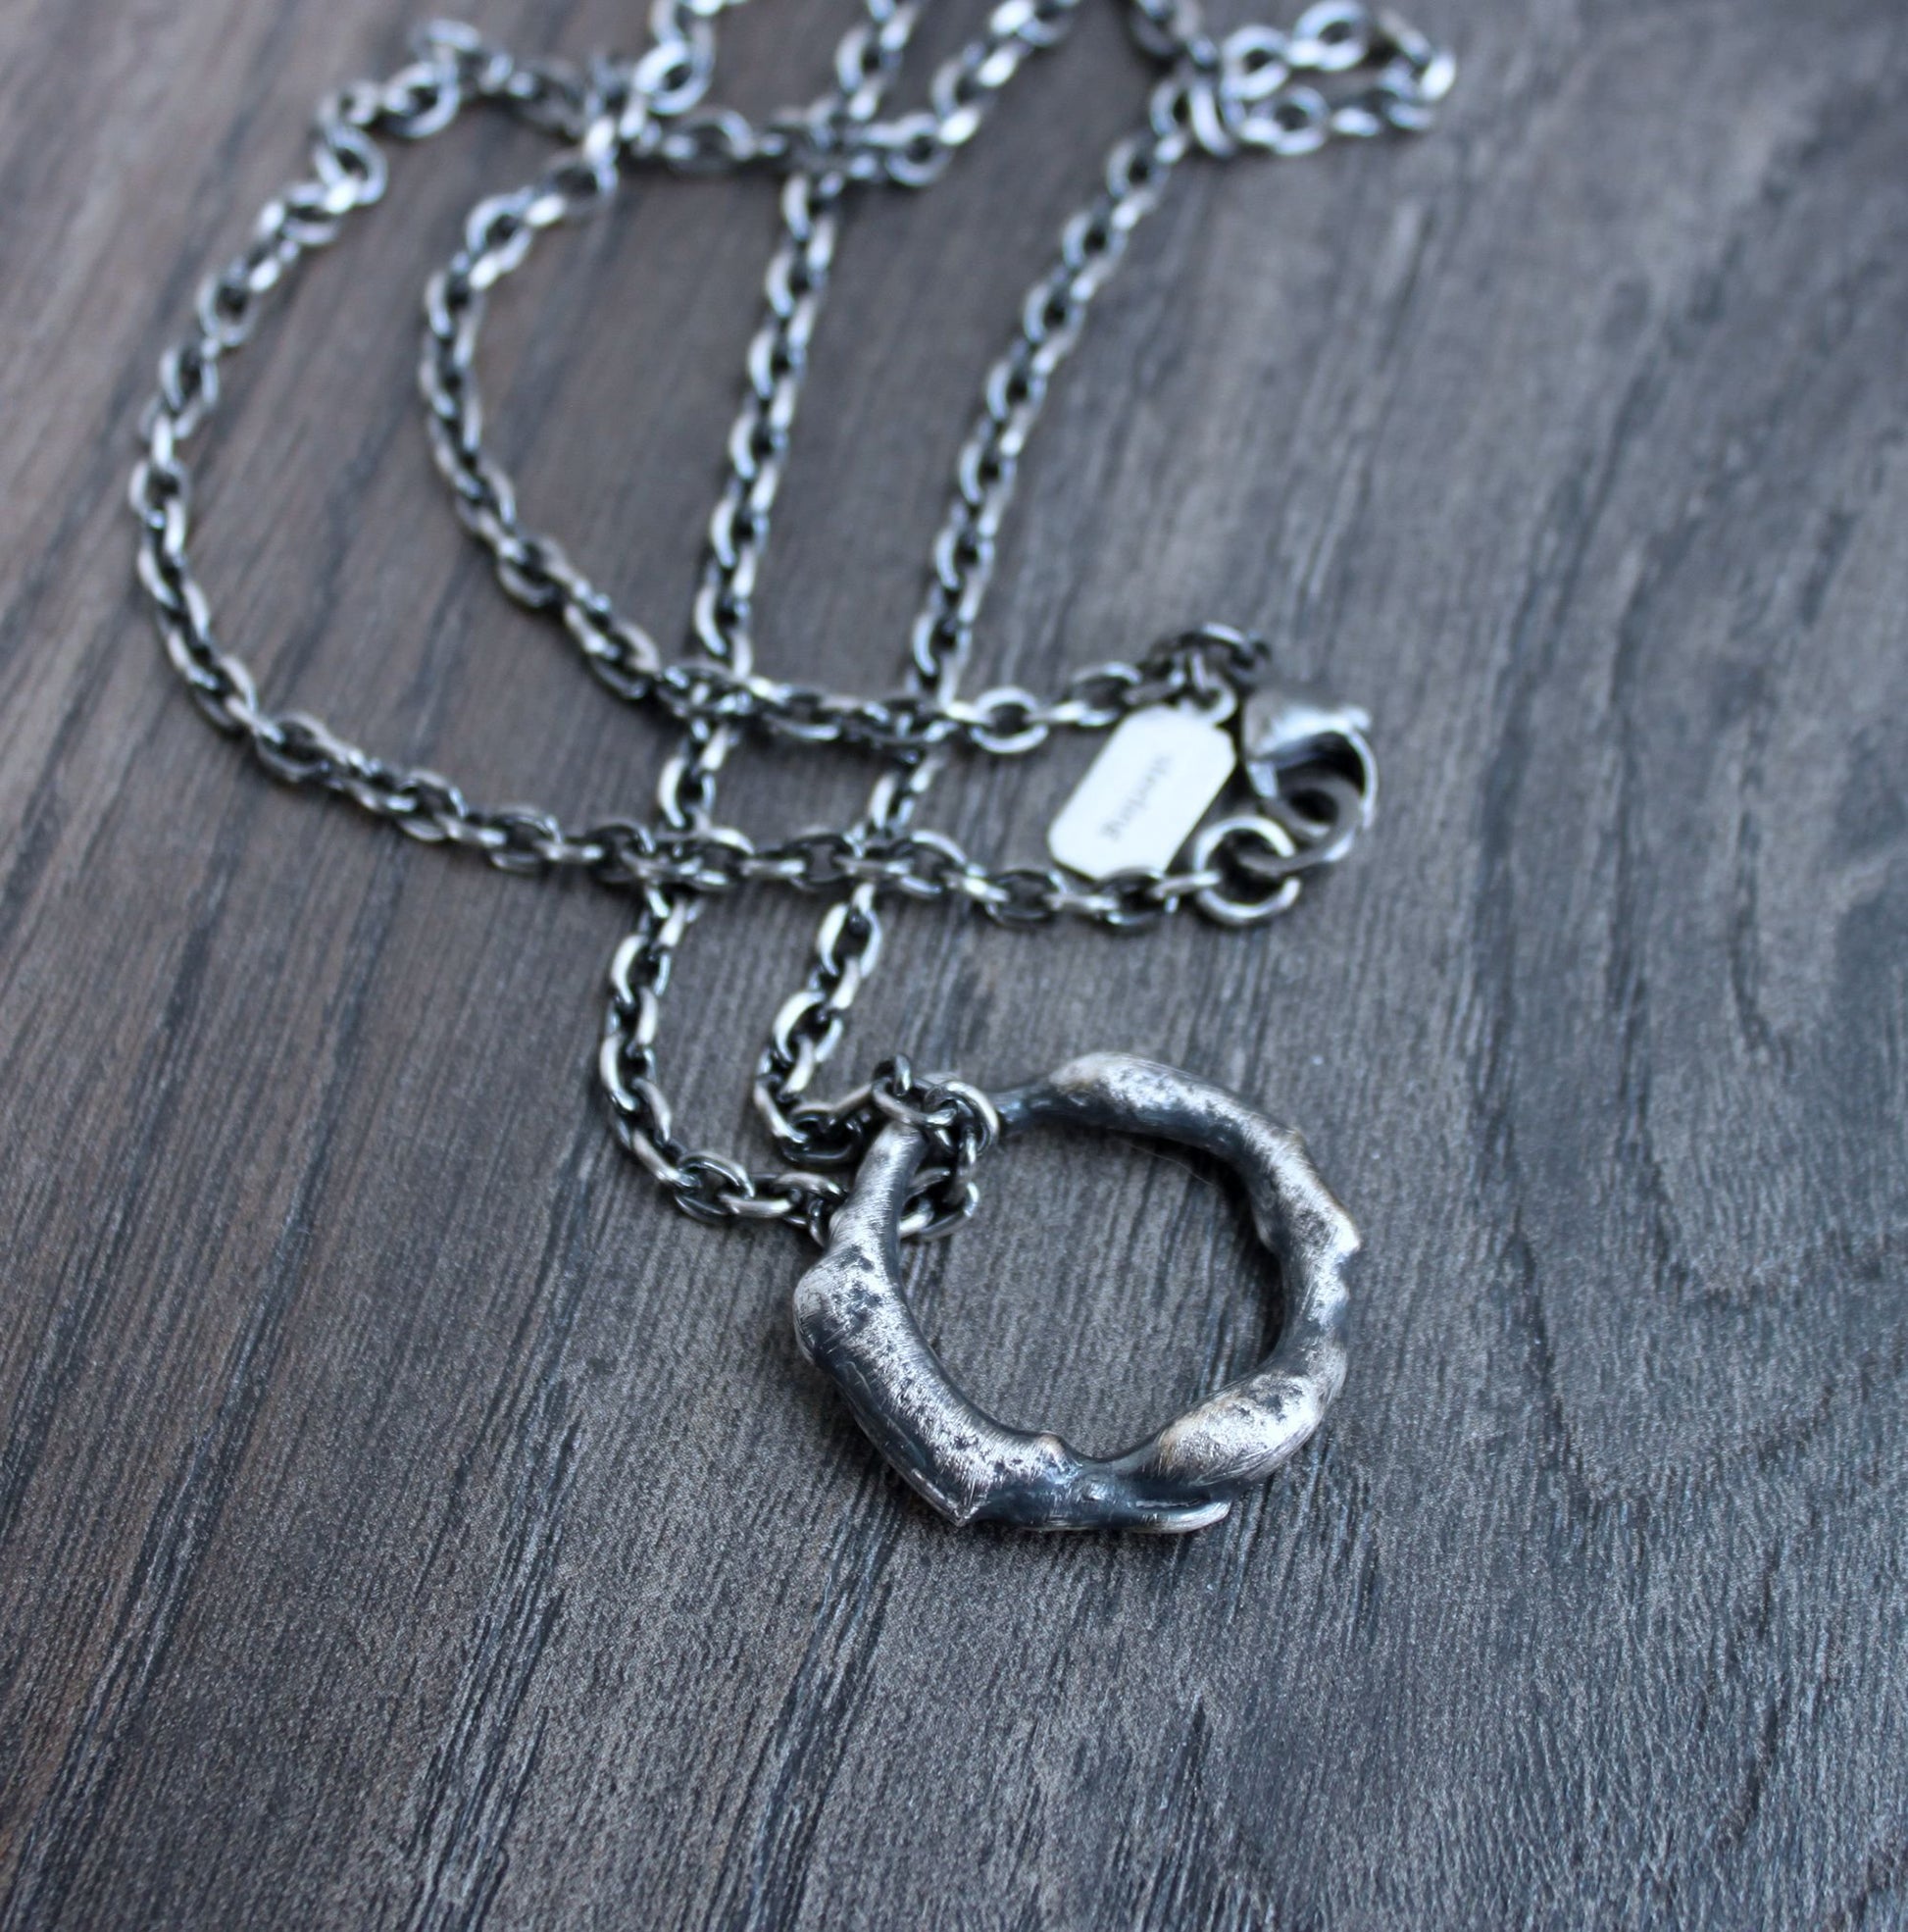 Men's Abstract Silver Hoop Pendant necklace